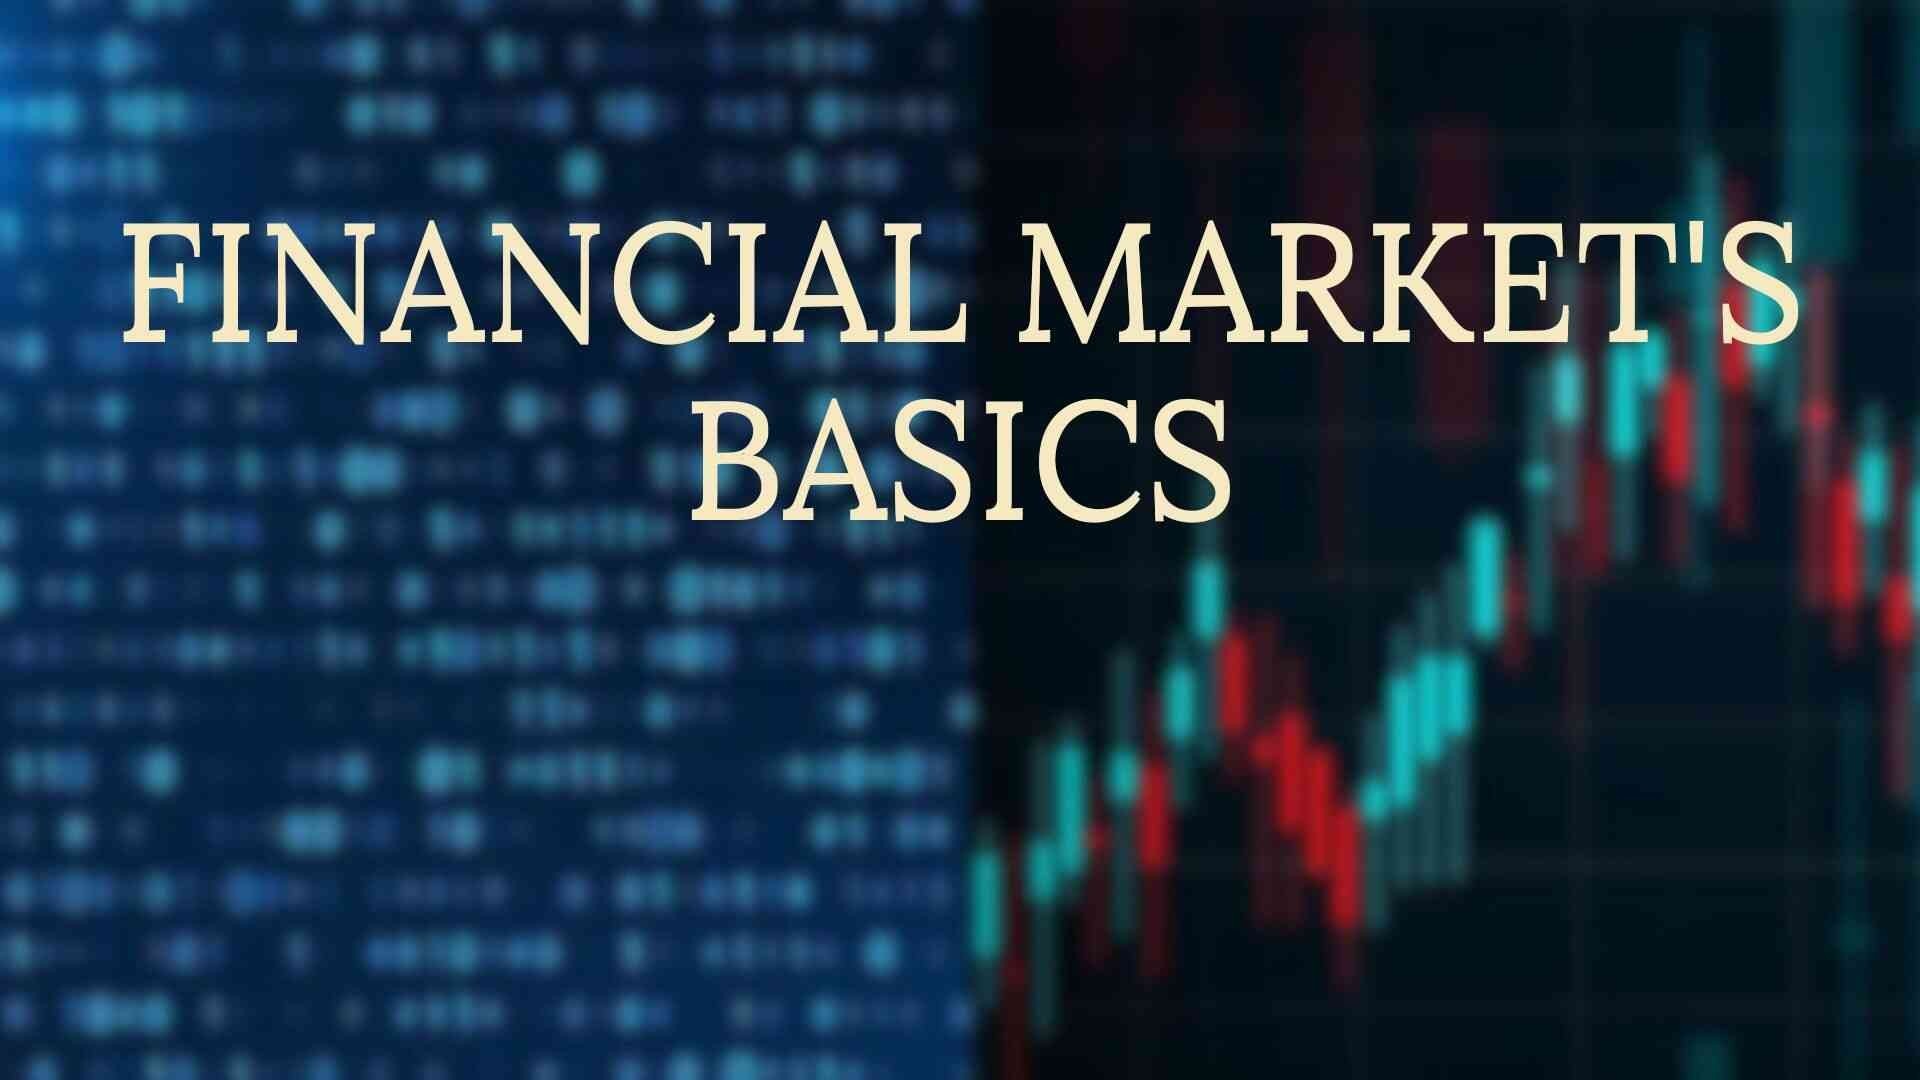 Basics of financial markets and its types